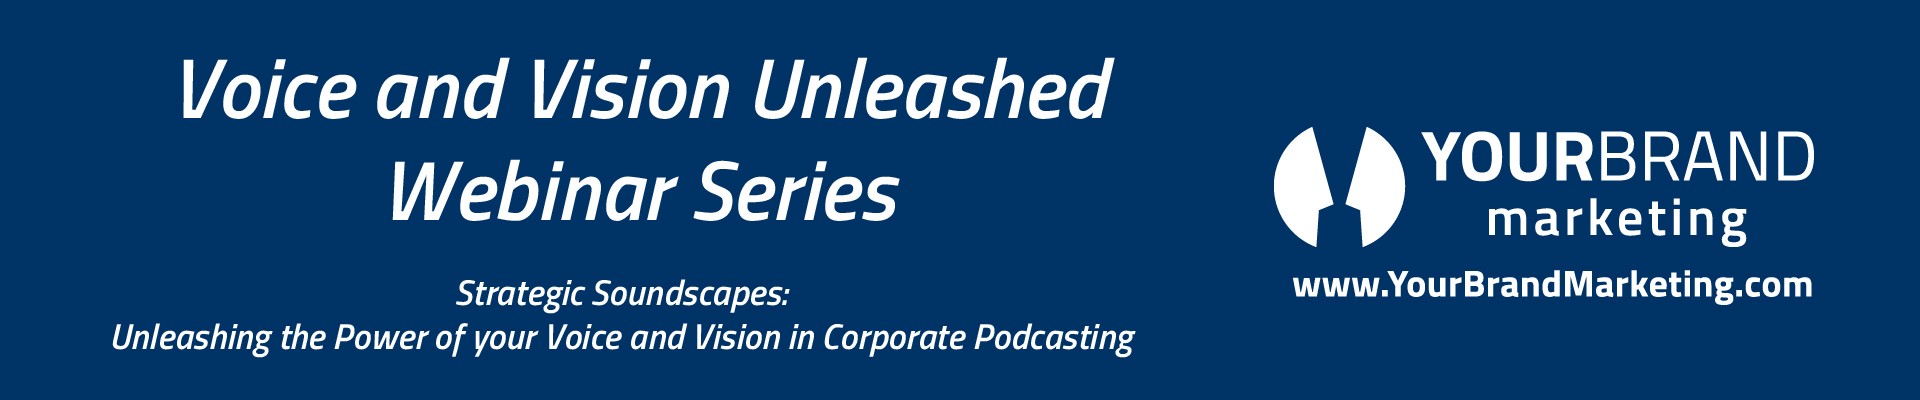 Voice and Vision Unleashed Webinar series